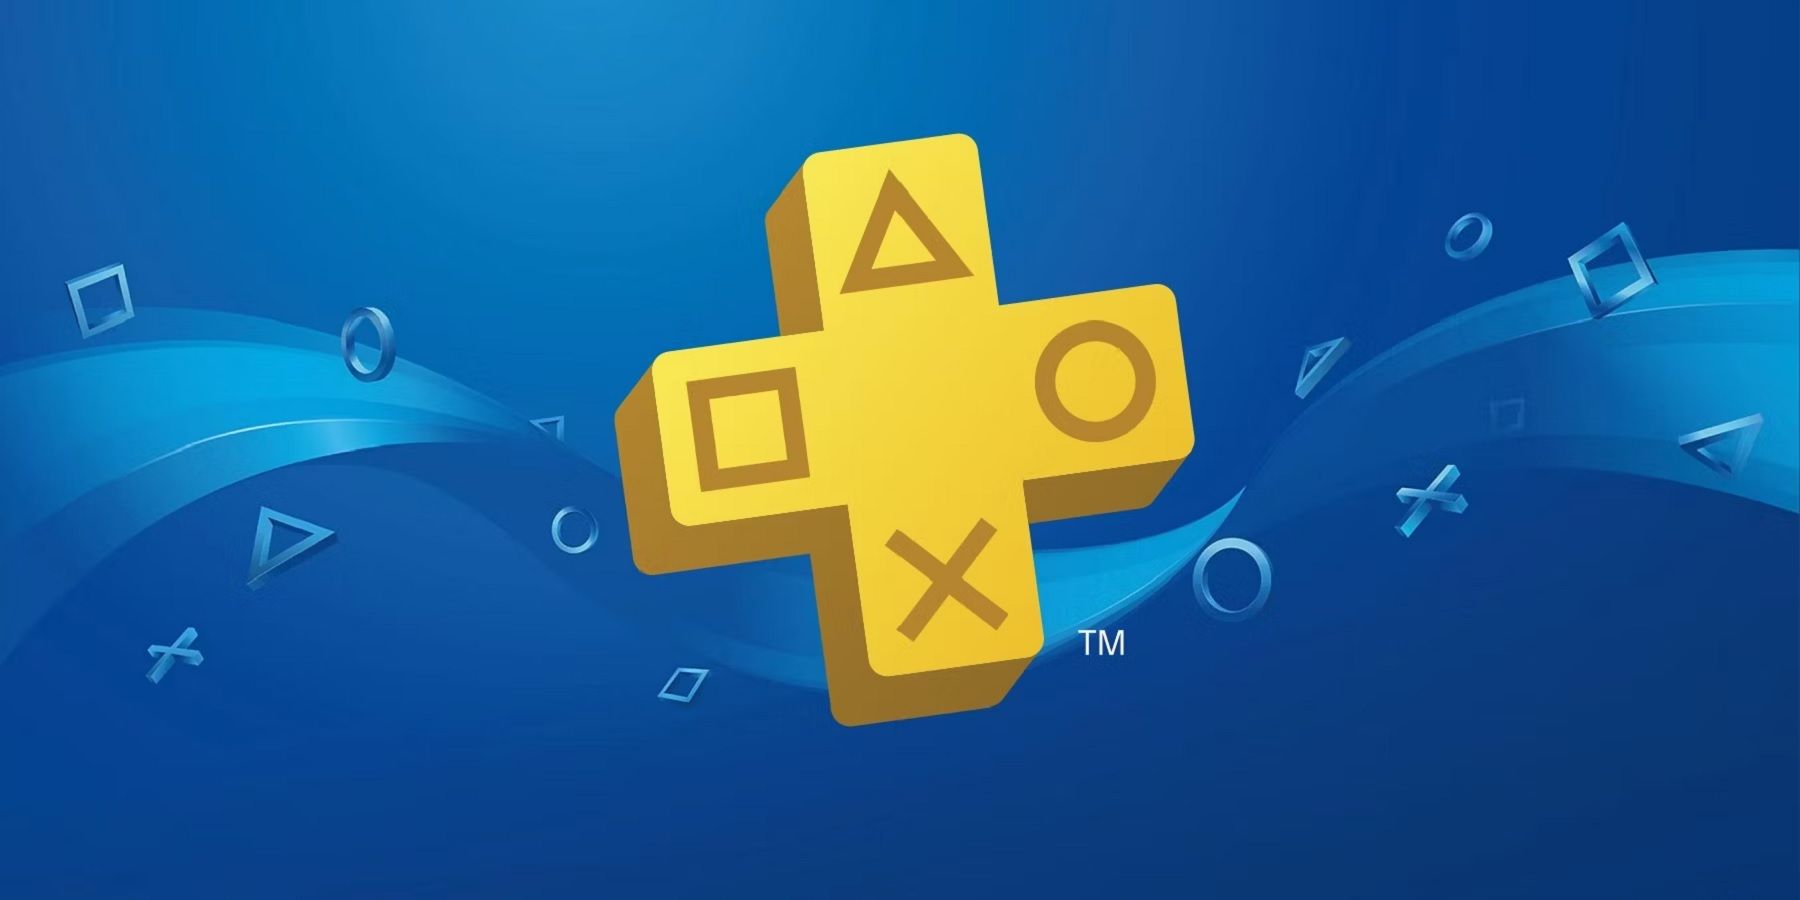 PlayStation Plus Extra and Premium free games announced for October 2022